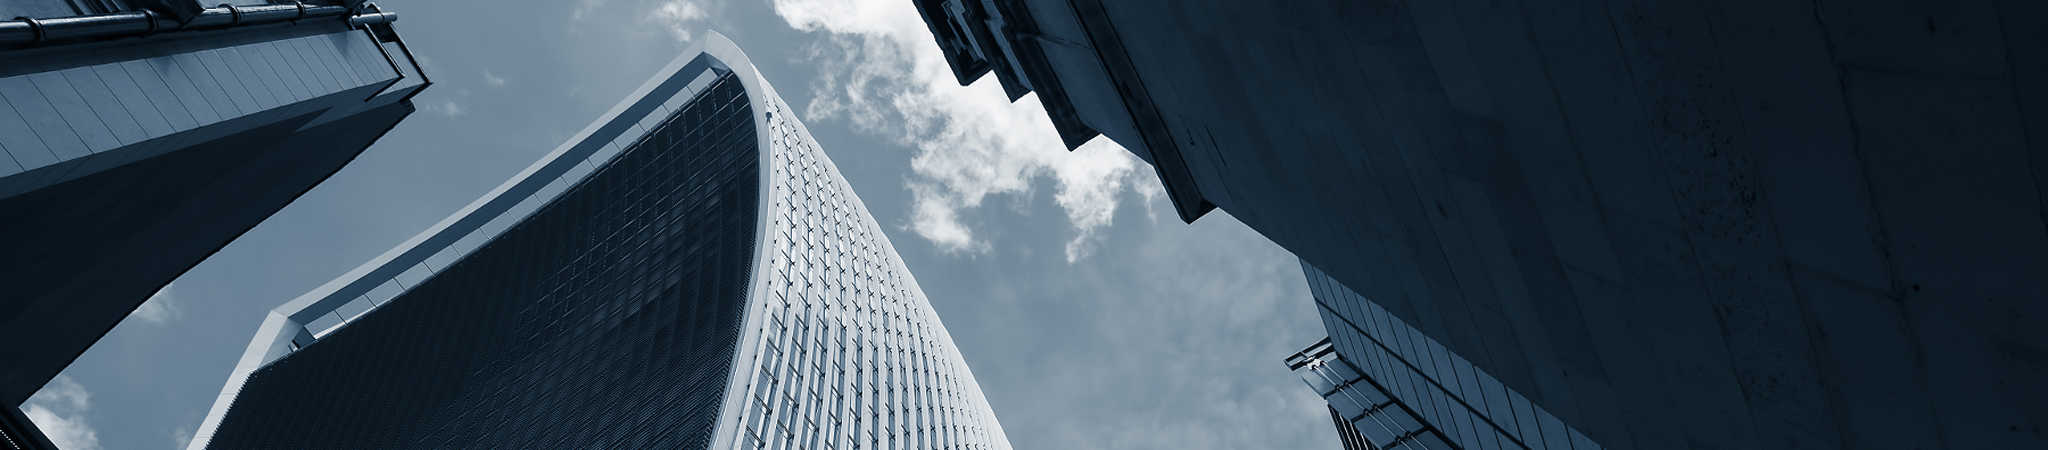 Commercial skyscrapers stretch upward on a sunny day. This image symbolizes business law.